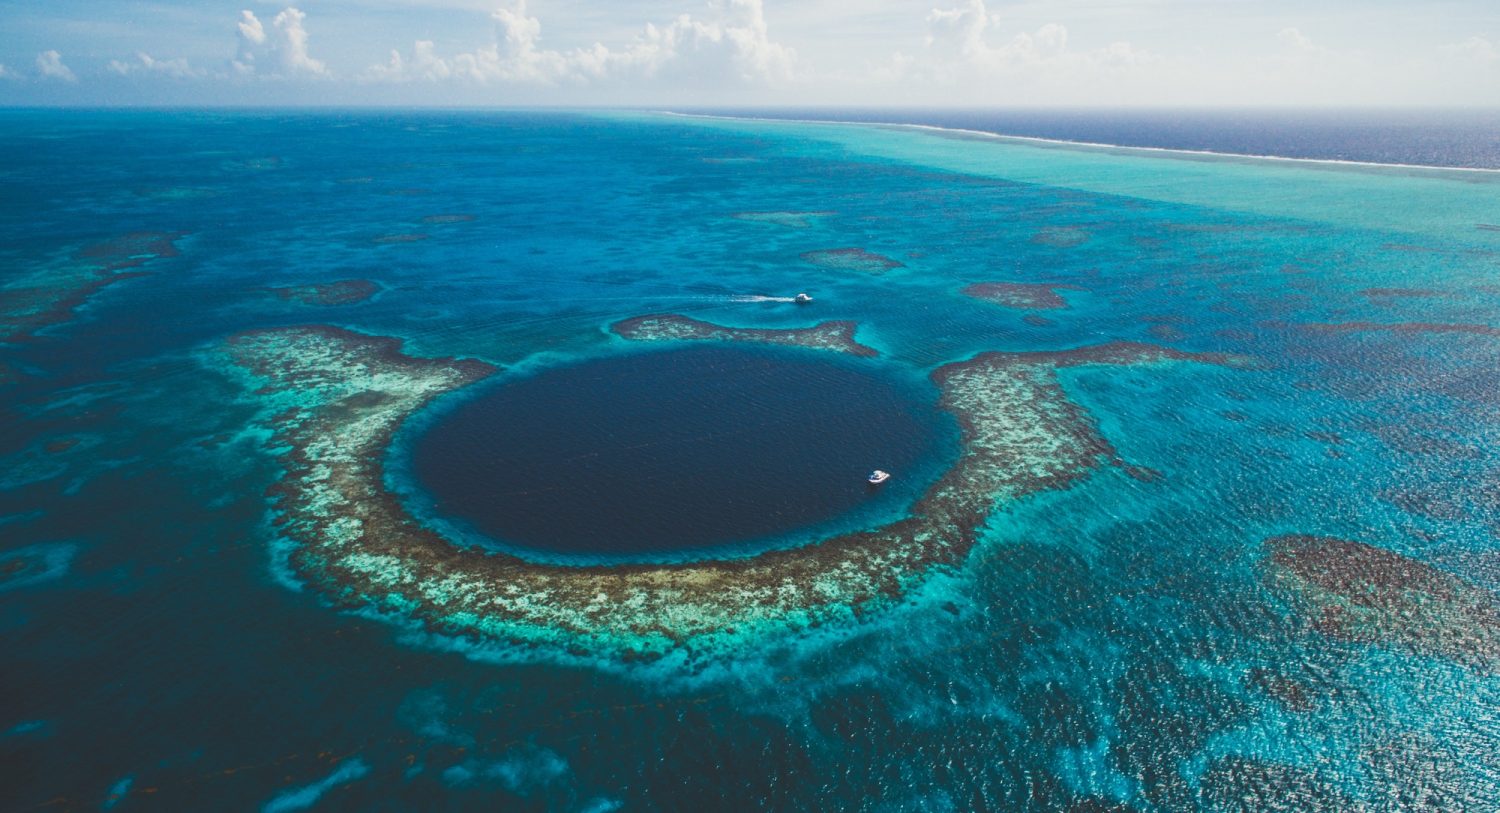 10 Top Tourist Attractions in Belize